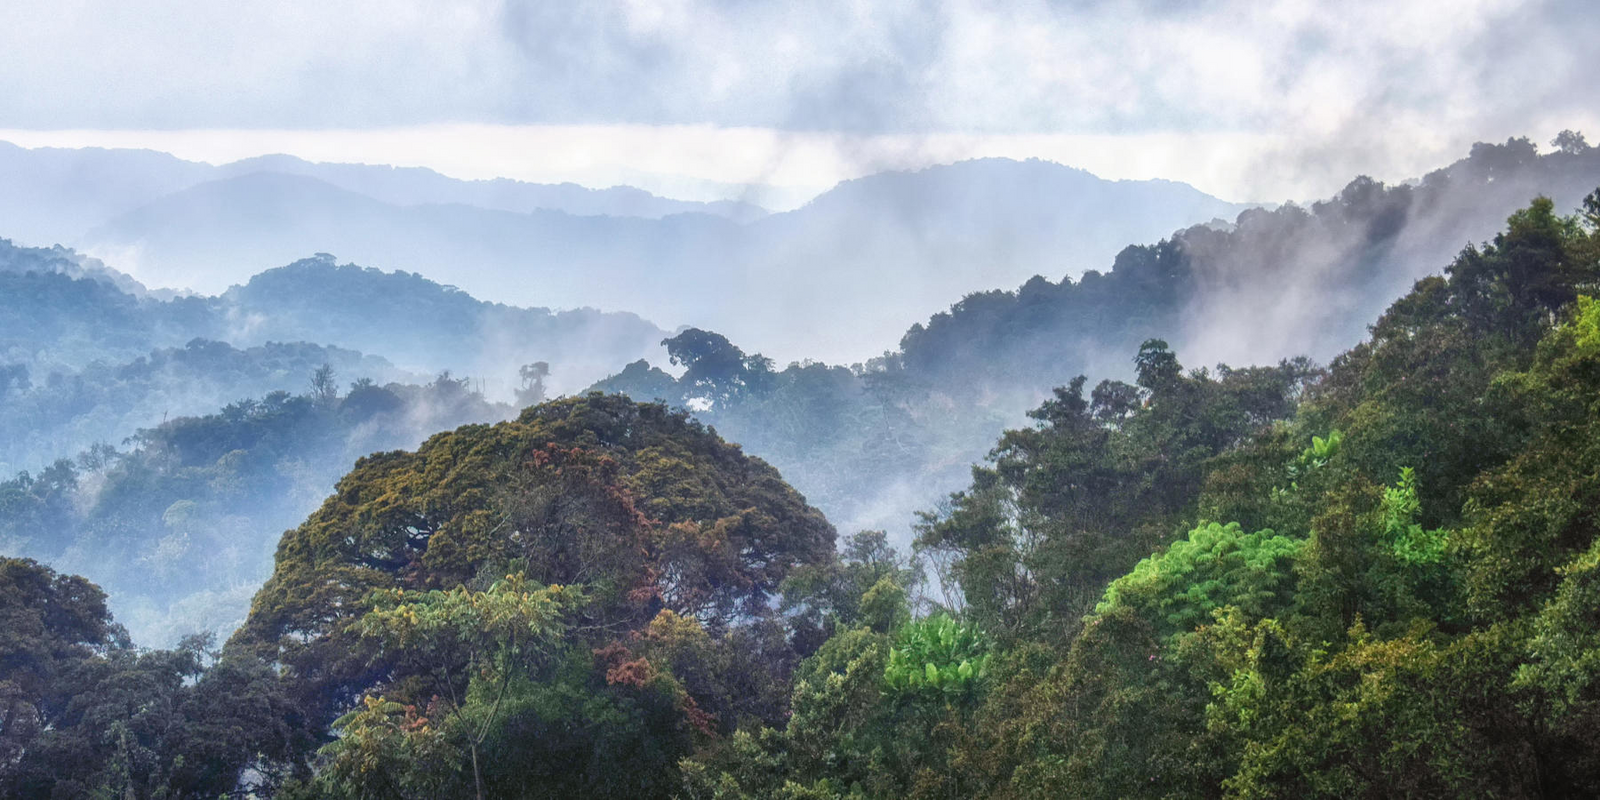 NYUNGWE FOREST NATIONAL PARK